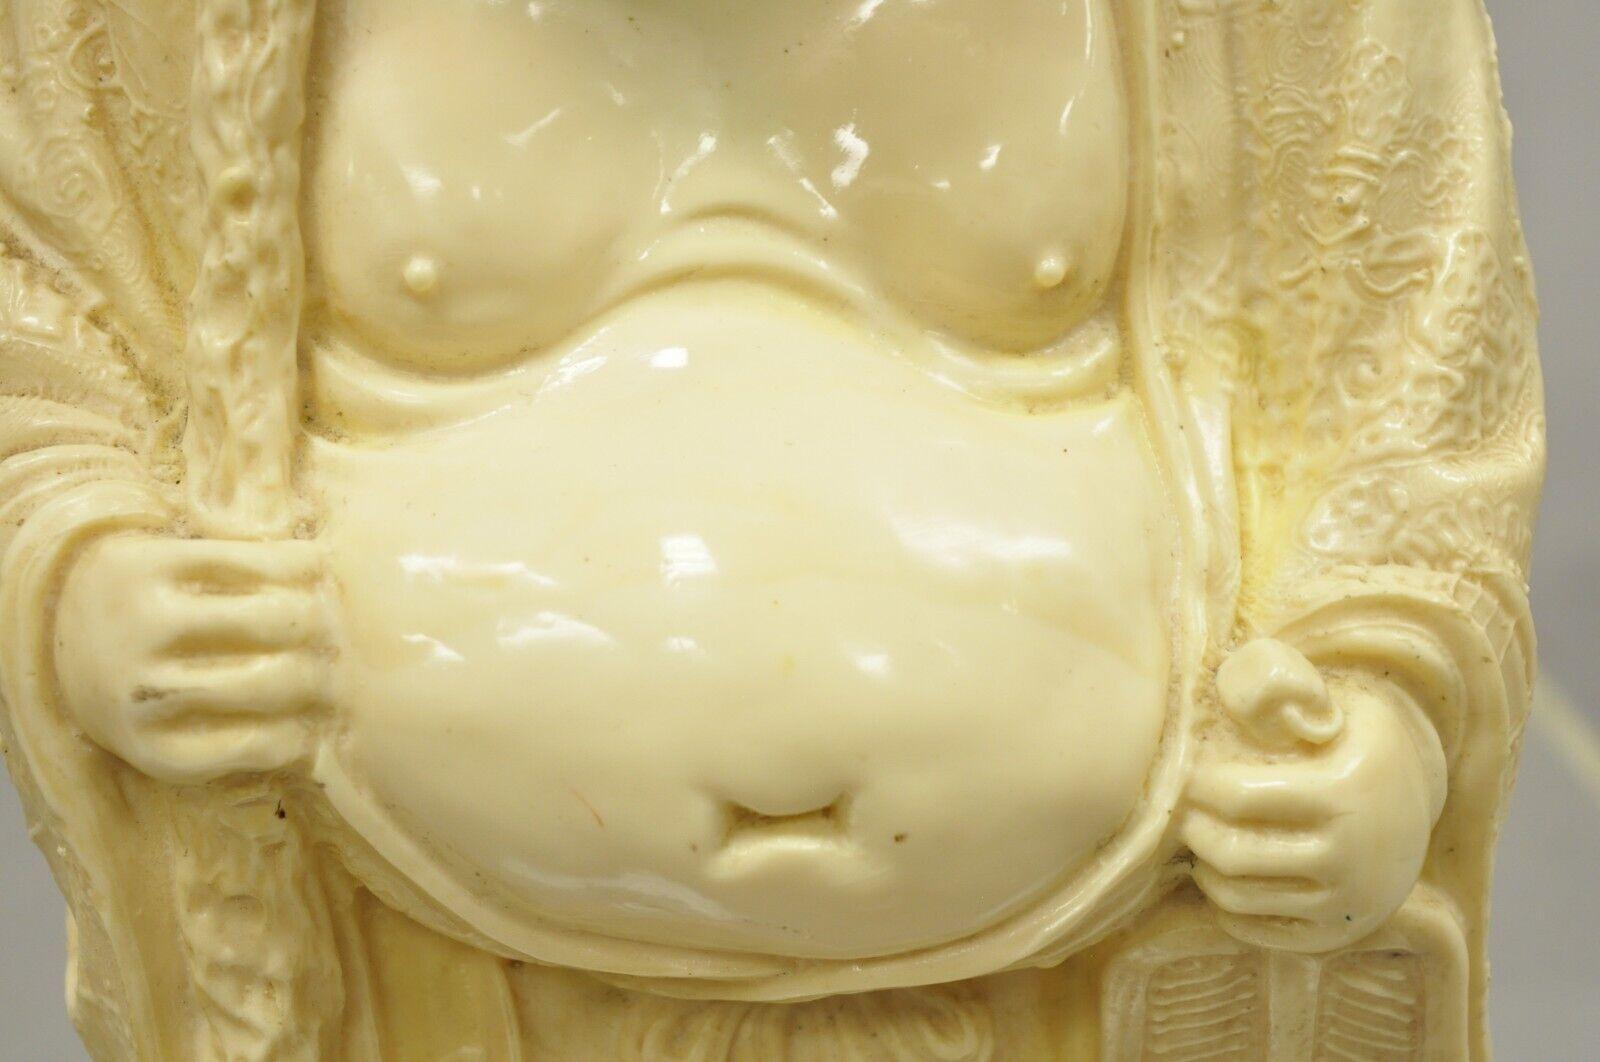 Vintage Resin Laughing Buddah Statue Sculpture Figure In Good Condition For Sale In Philadelphia, PA